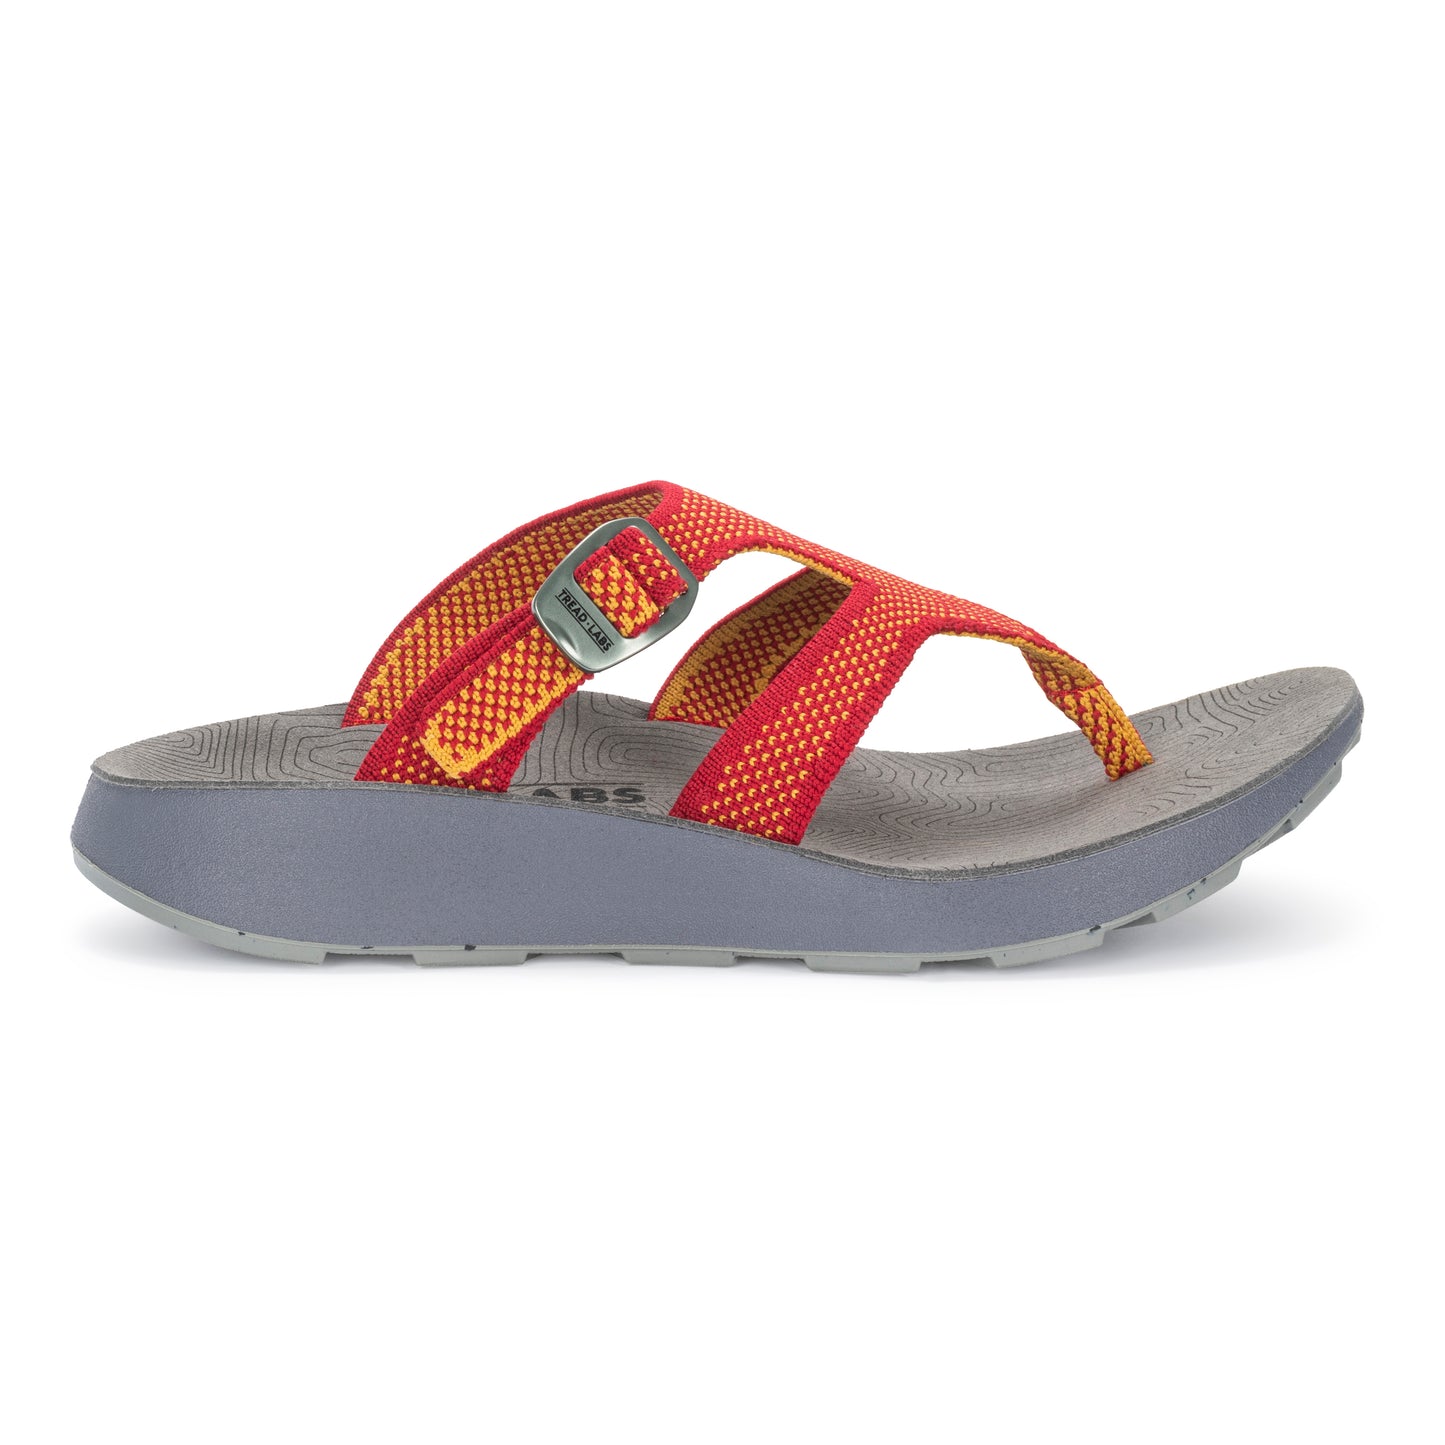 Discontinued Women's Covelo Sandal